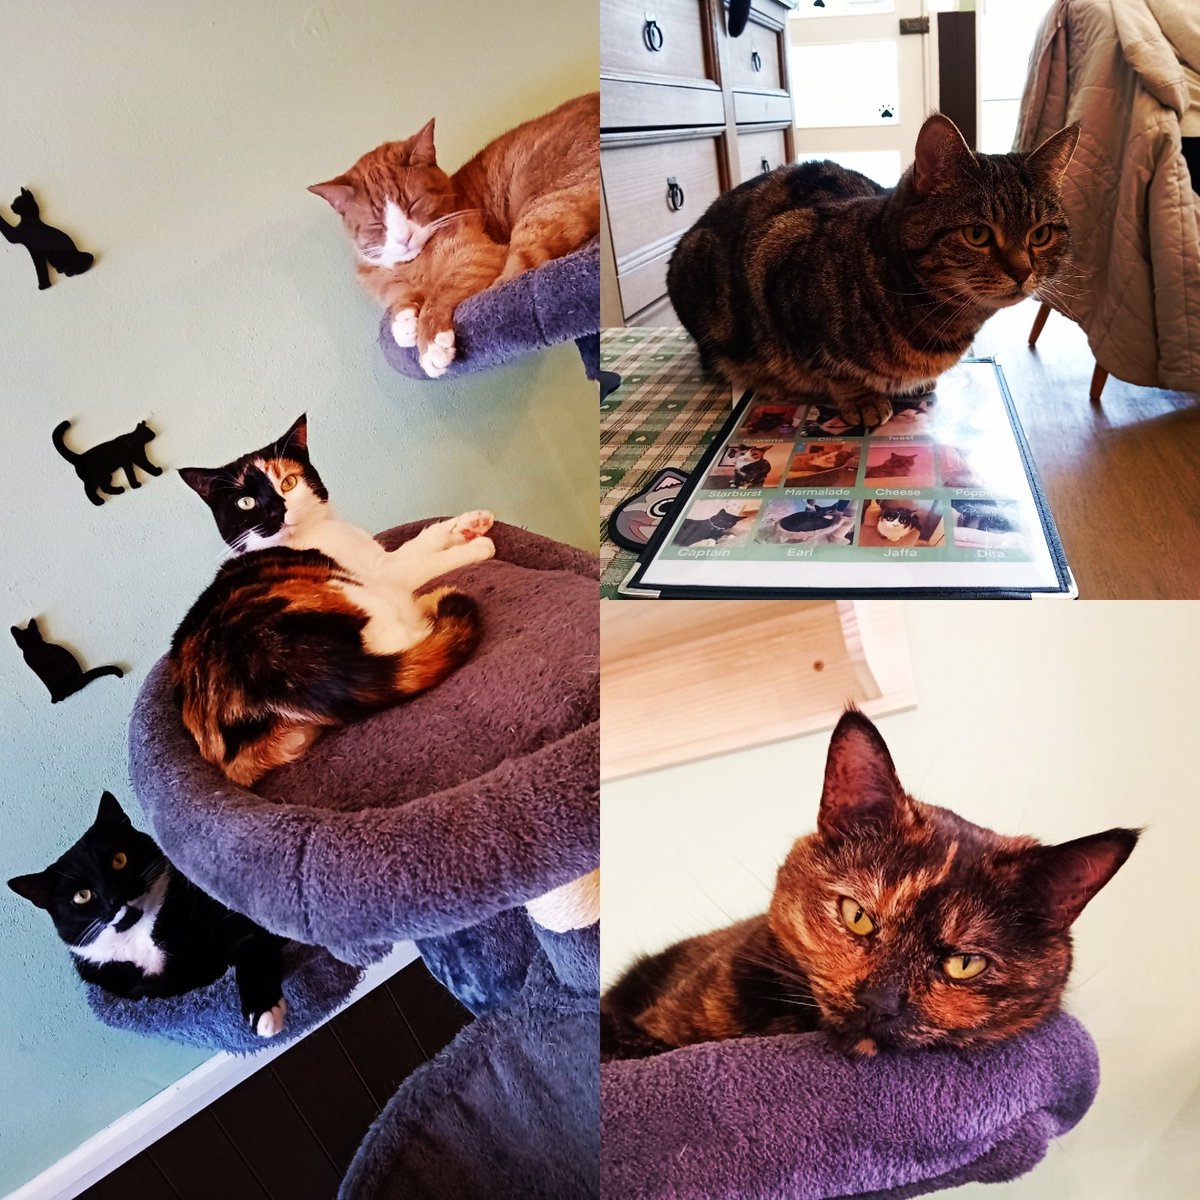 madcatter.pet is simply PURRFECT! 😻 #eastbourne #cat #catlover #catcafe #Caturday